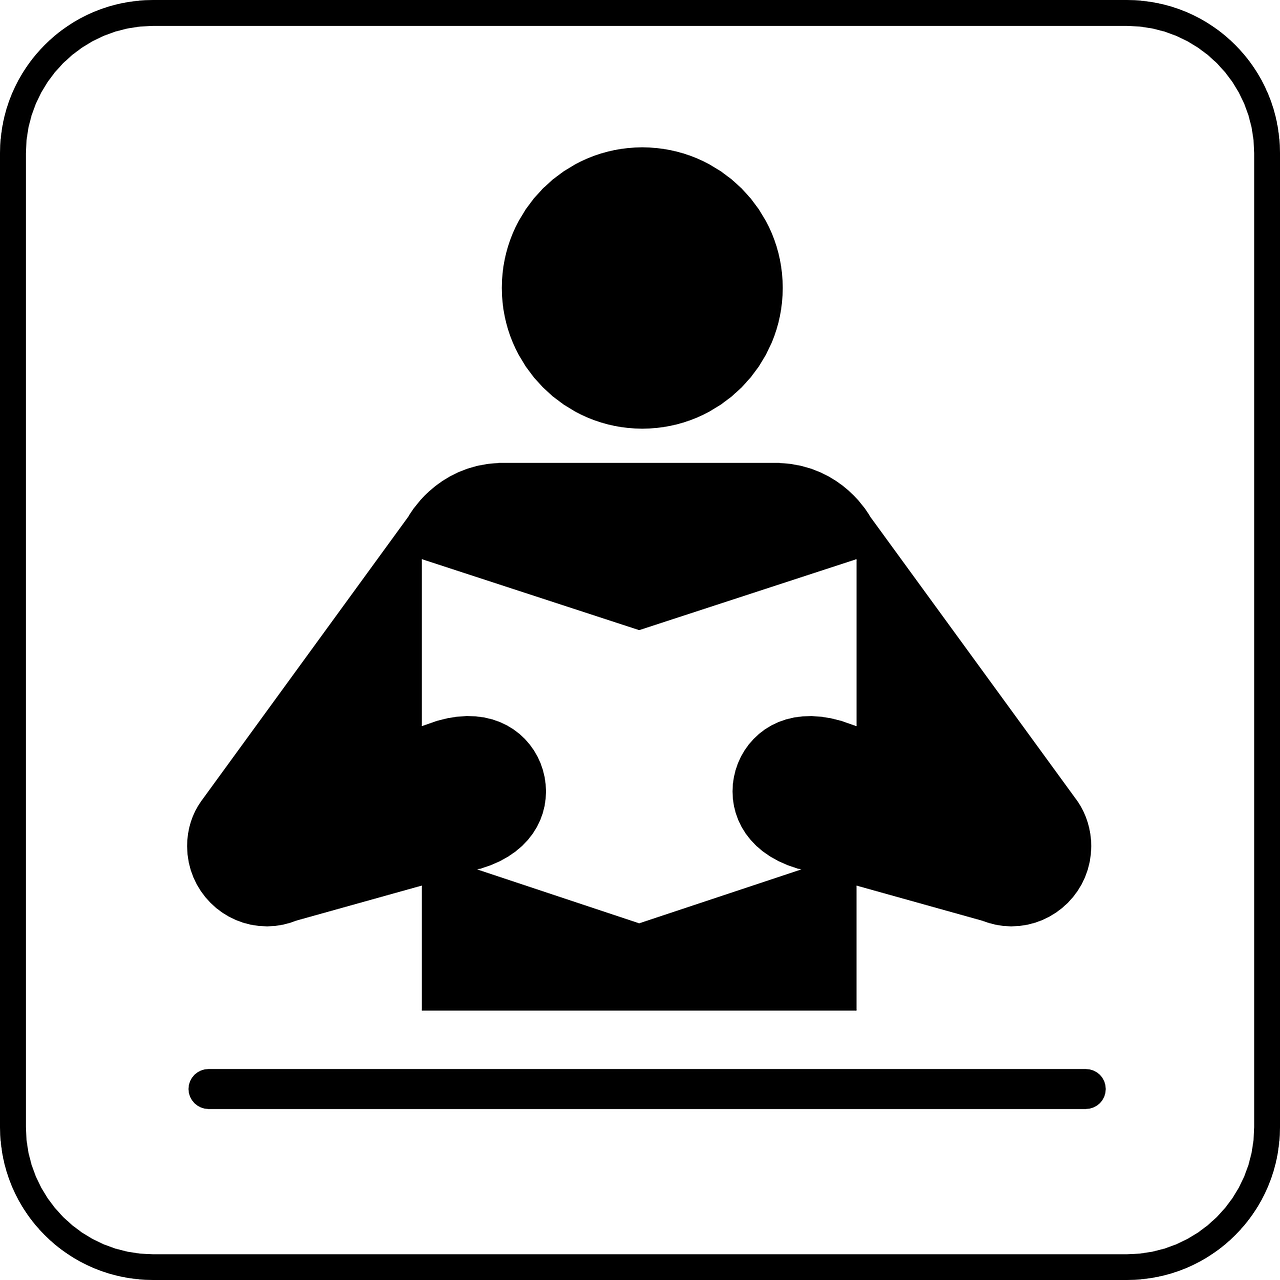 Sign of a person reading.  Image source: http://pixabay.com/p-99244/?no_redirect